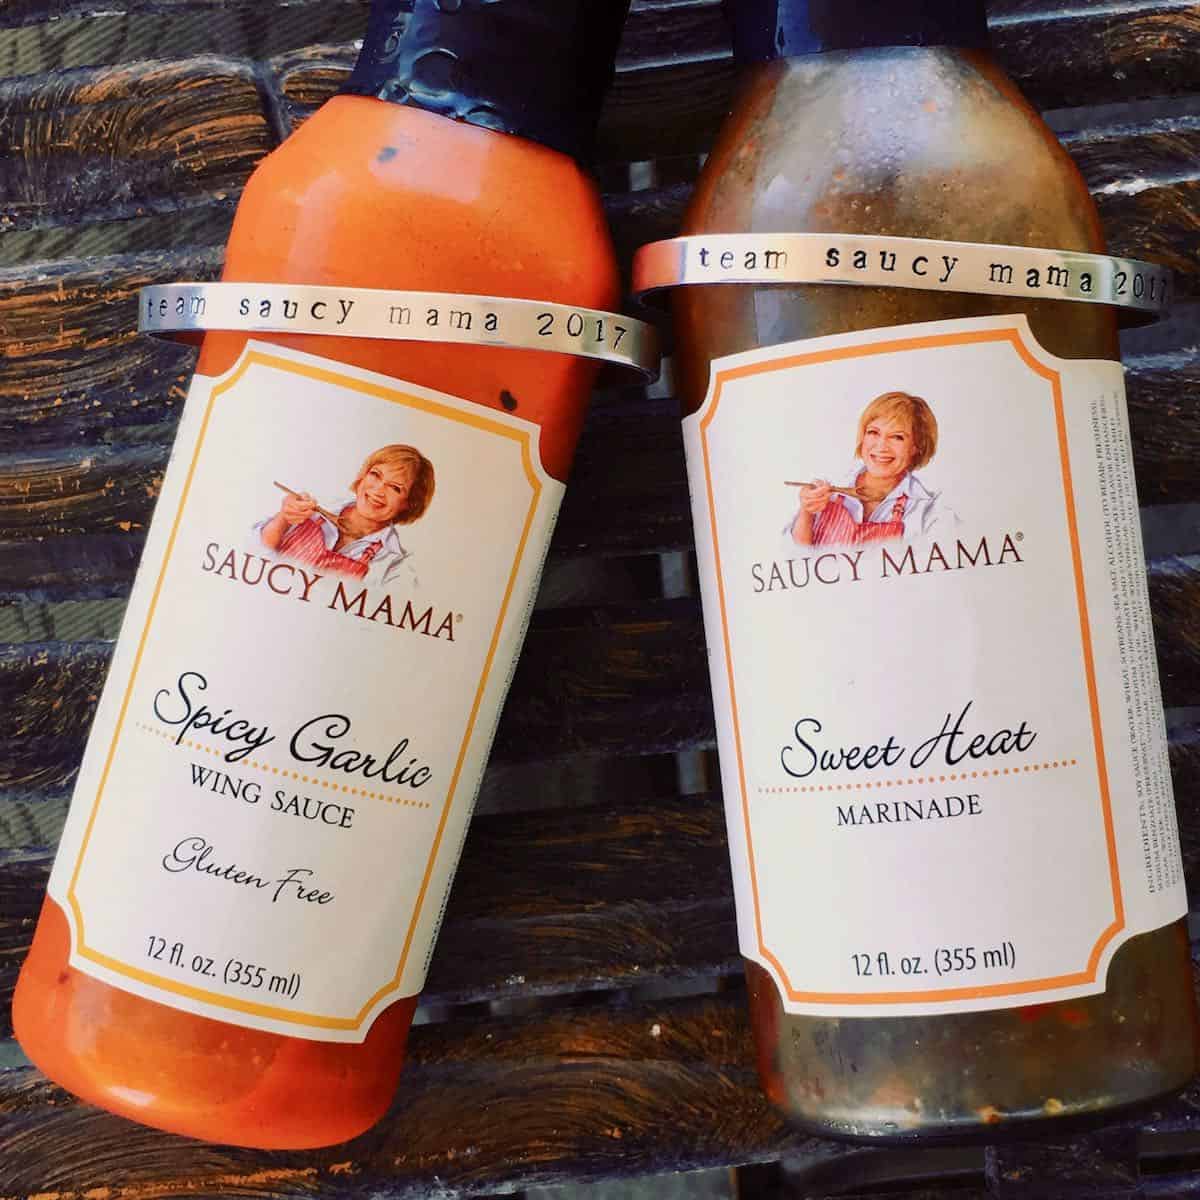 Saucy Mama products.